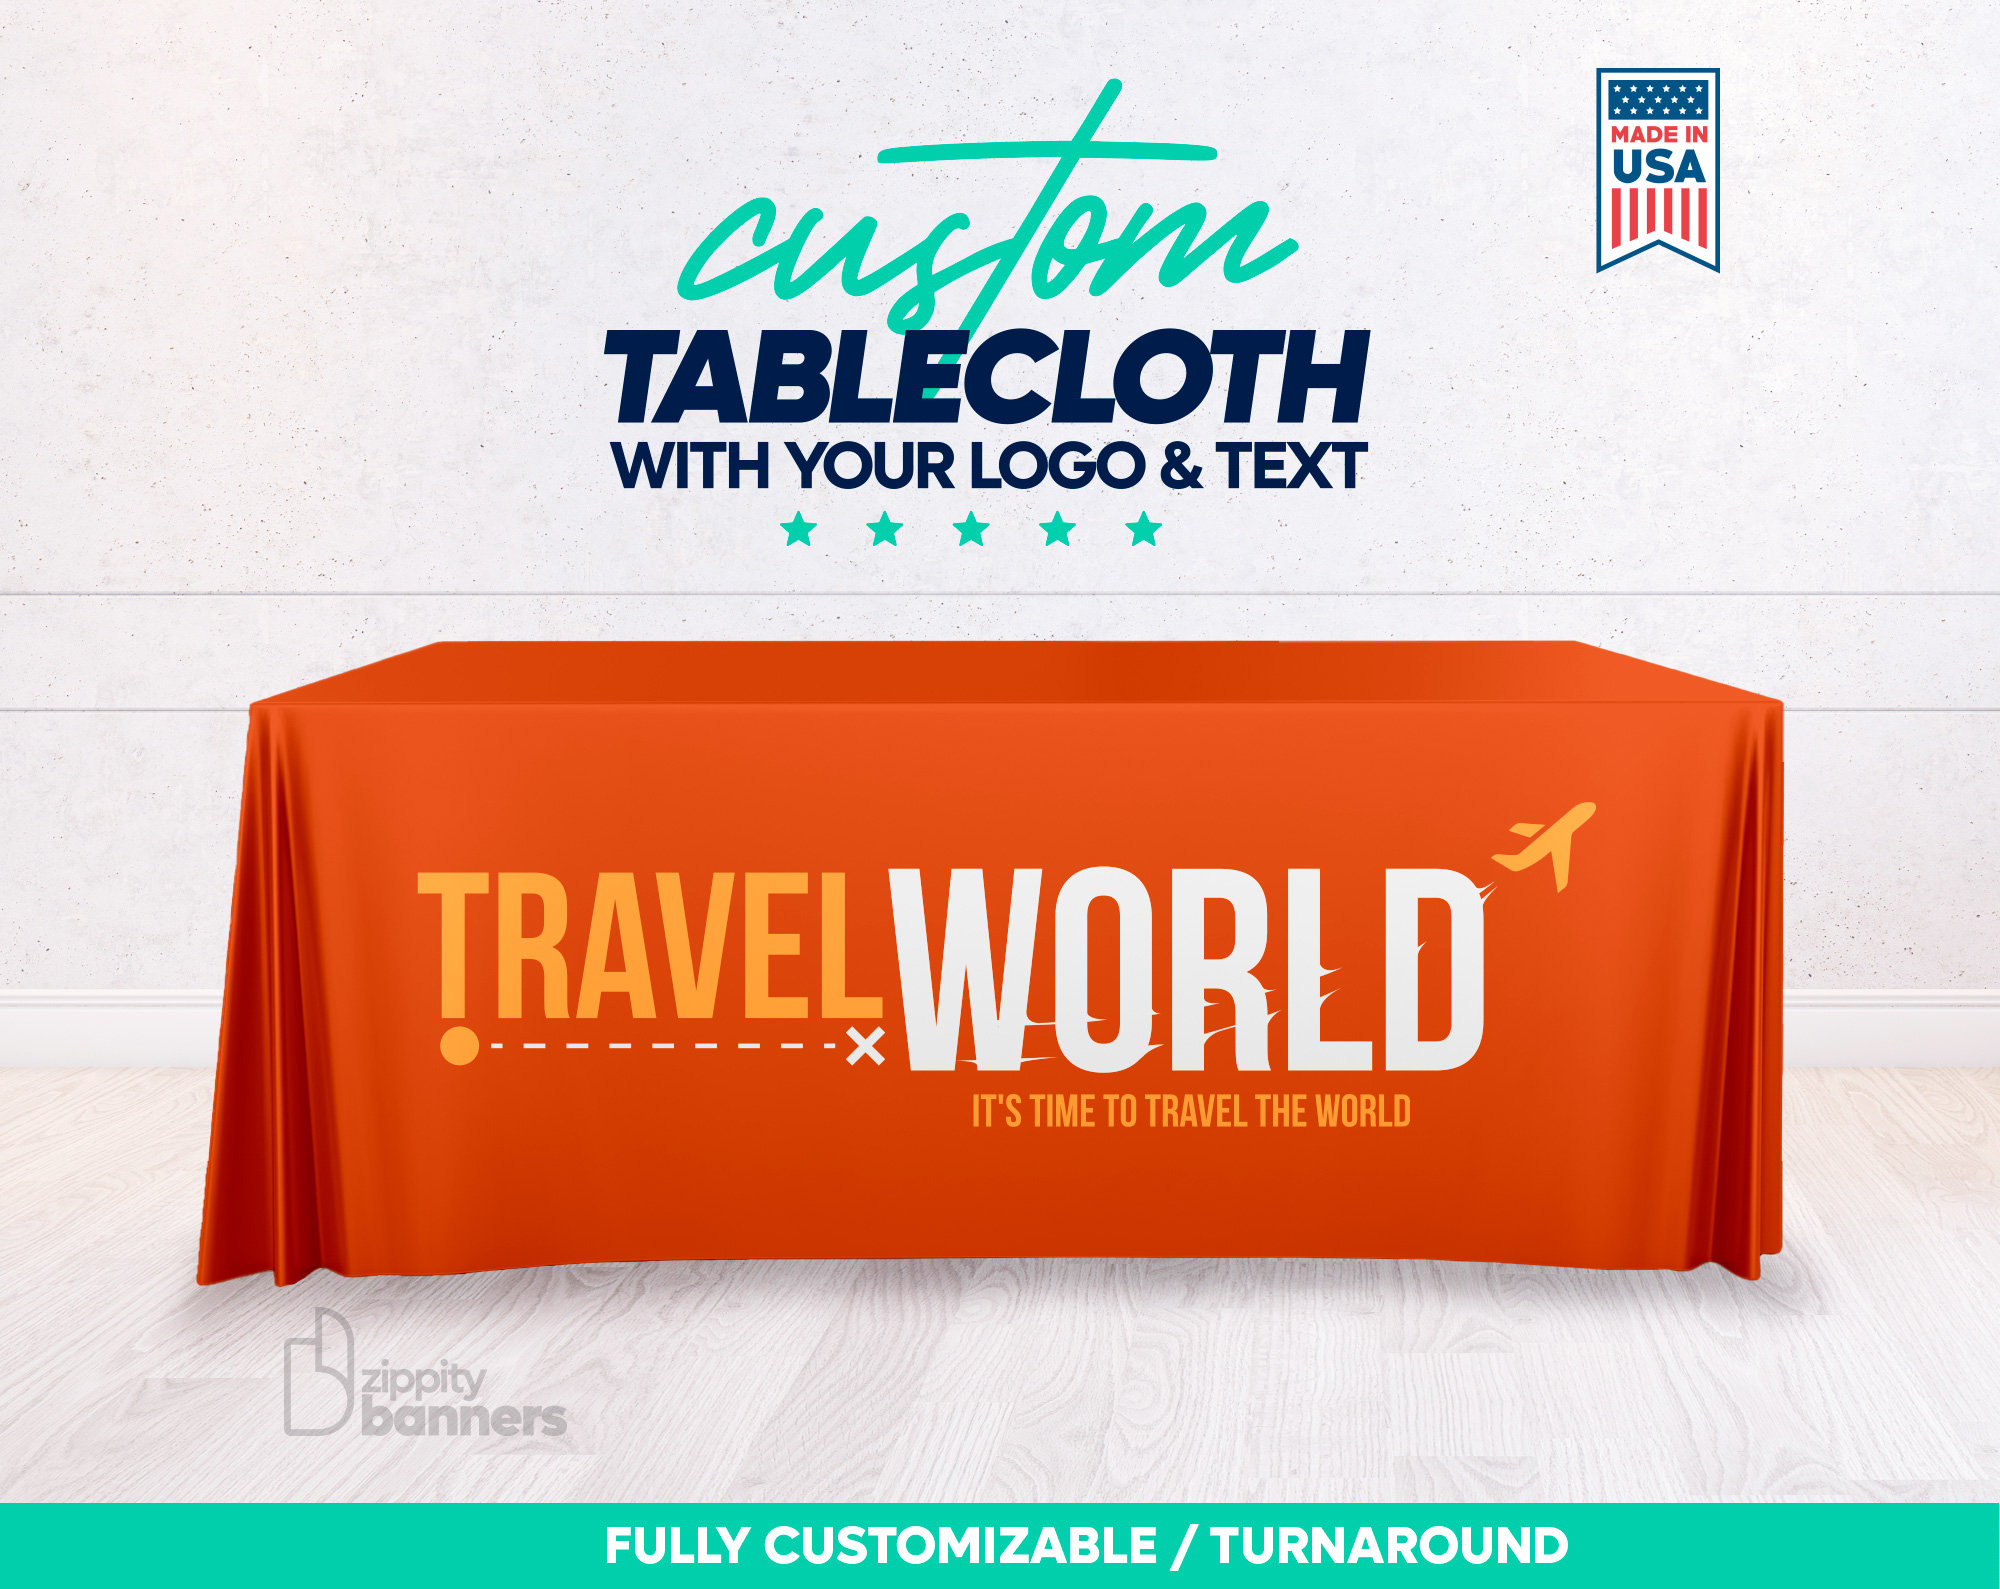 Fabric Table Covers for Trade Shows and Special Events - Buy Online!